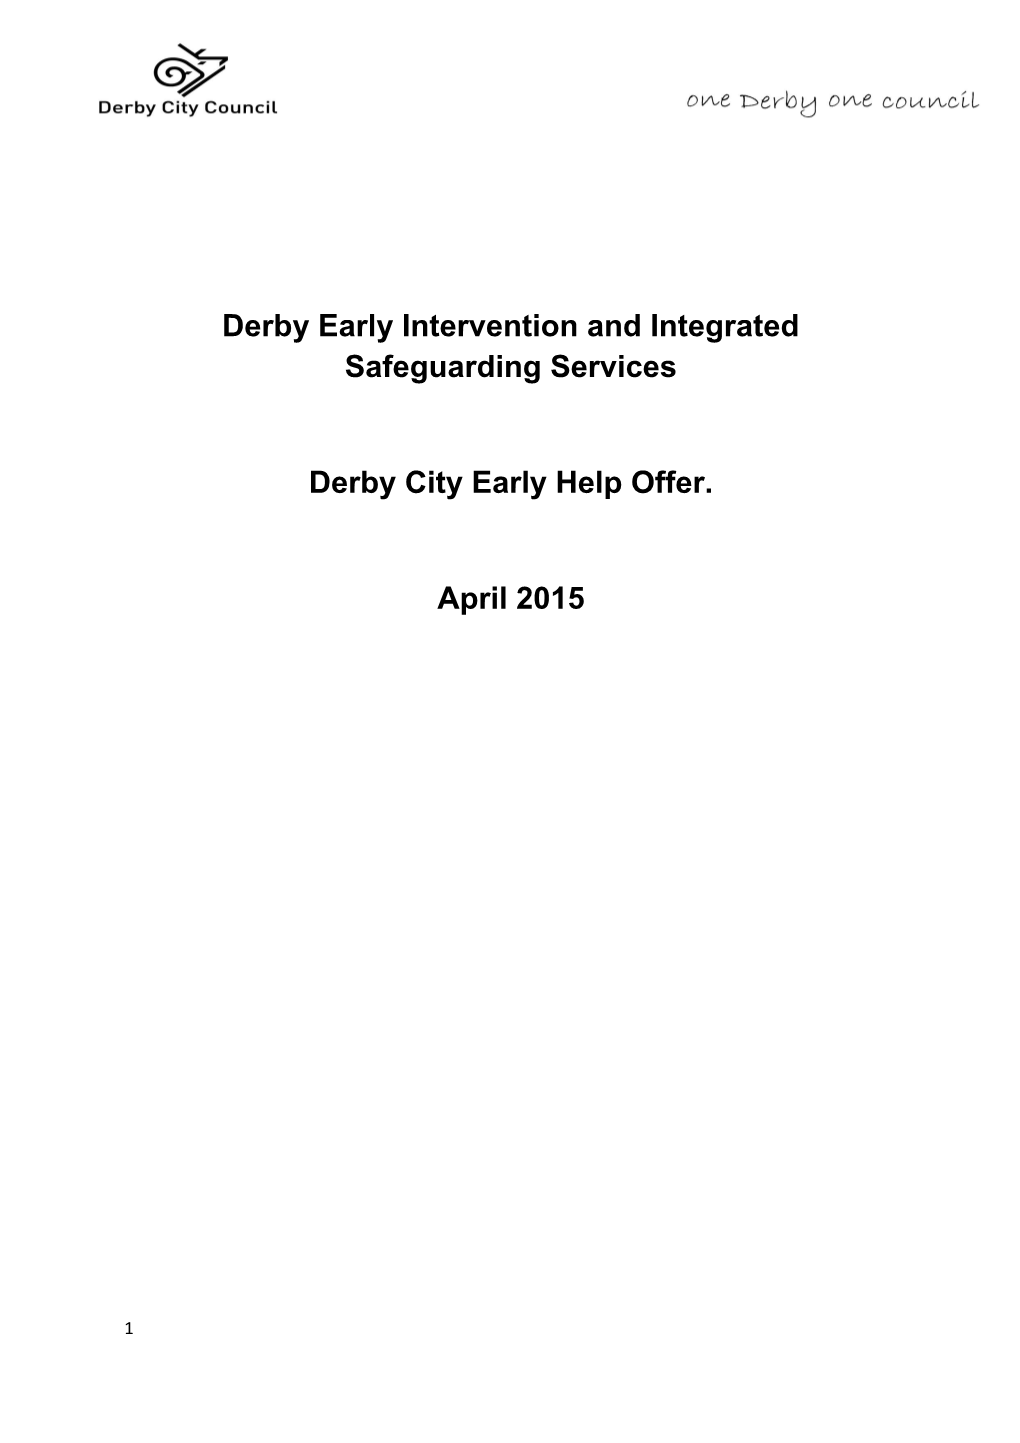 Derby Early Intervention and Integrated Safeguarding Services